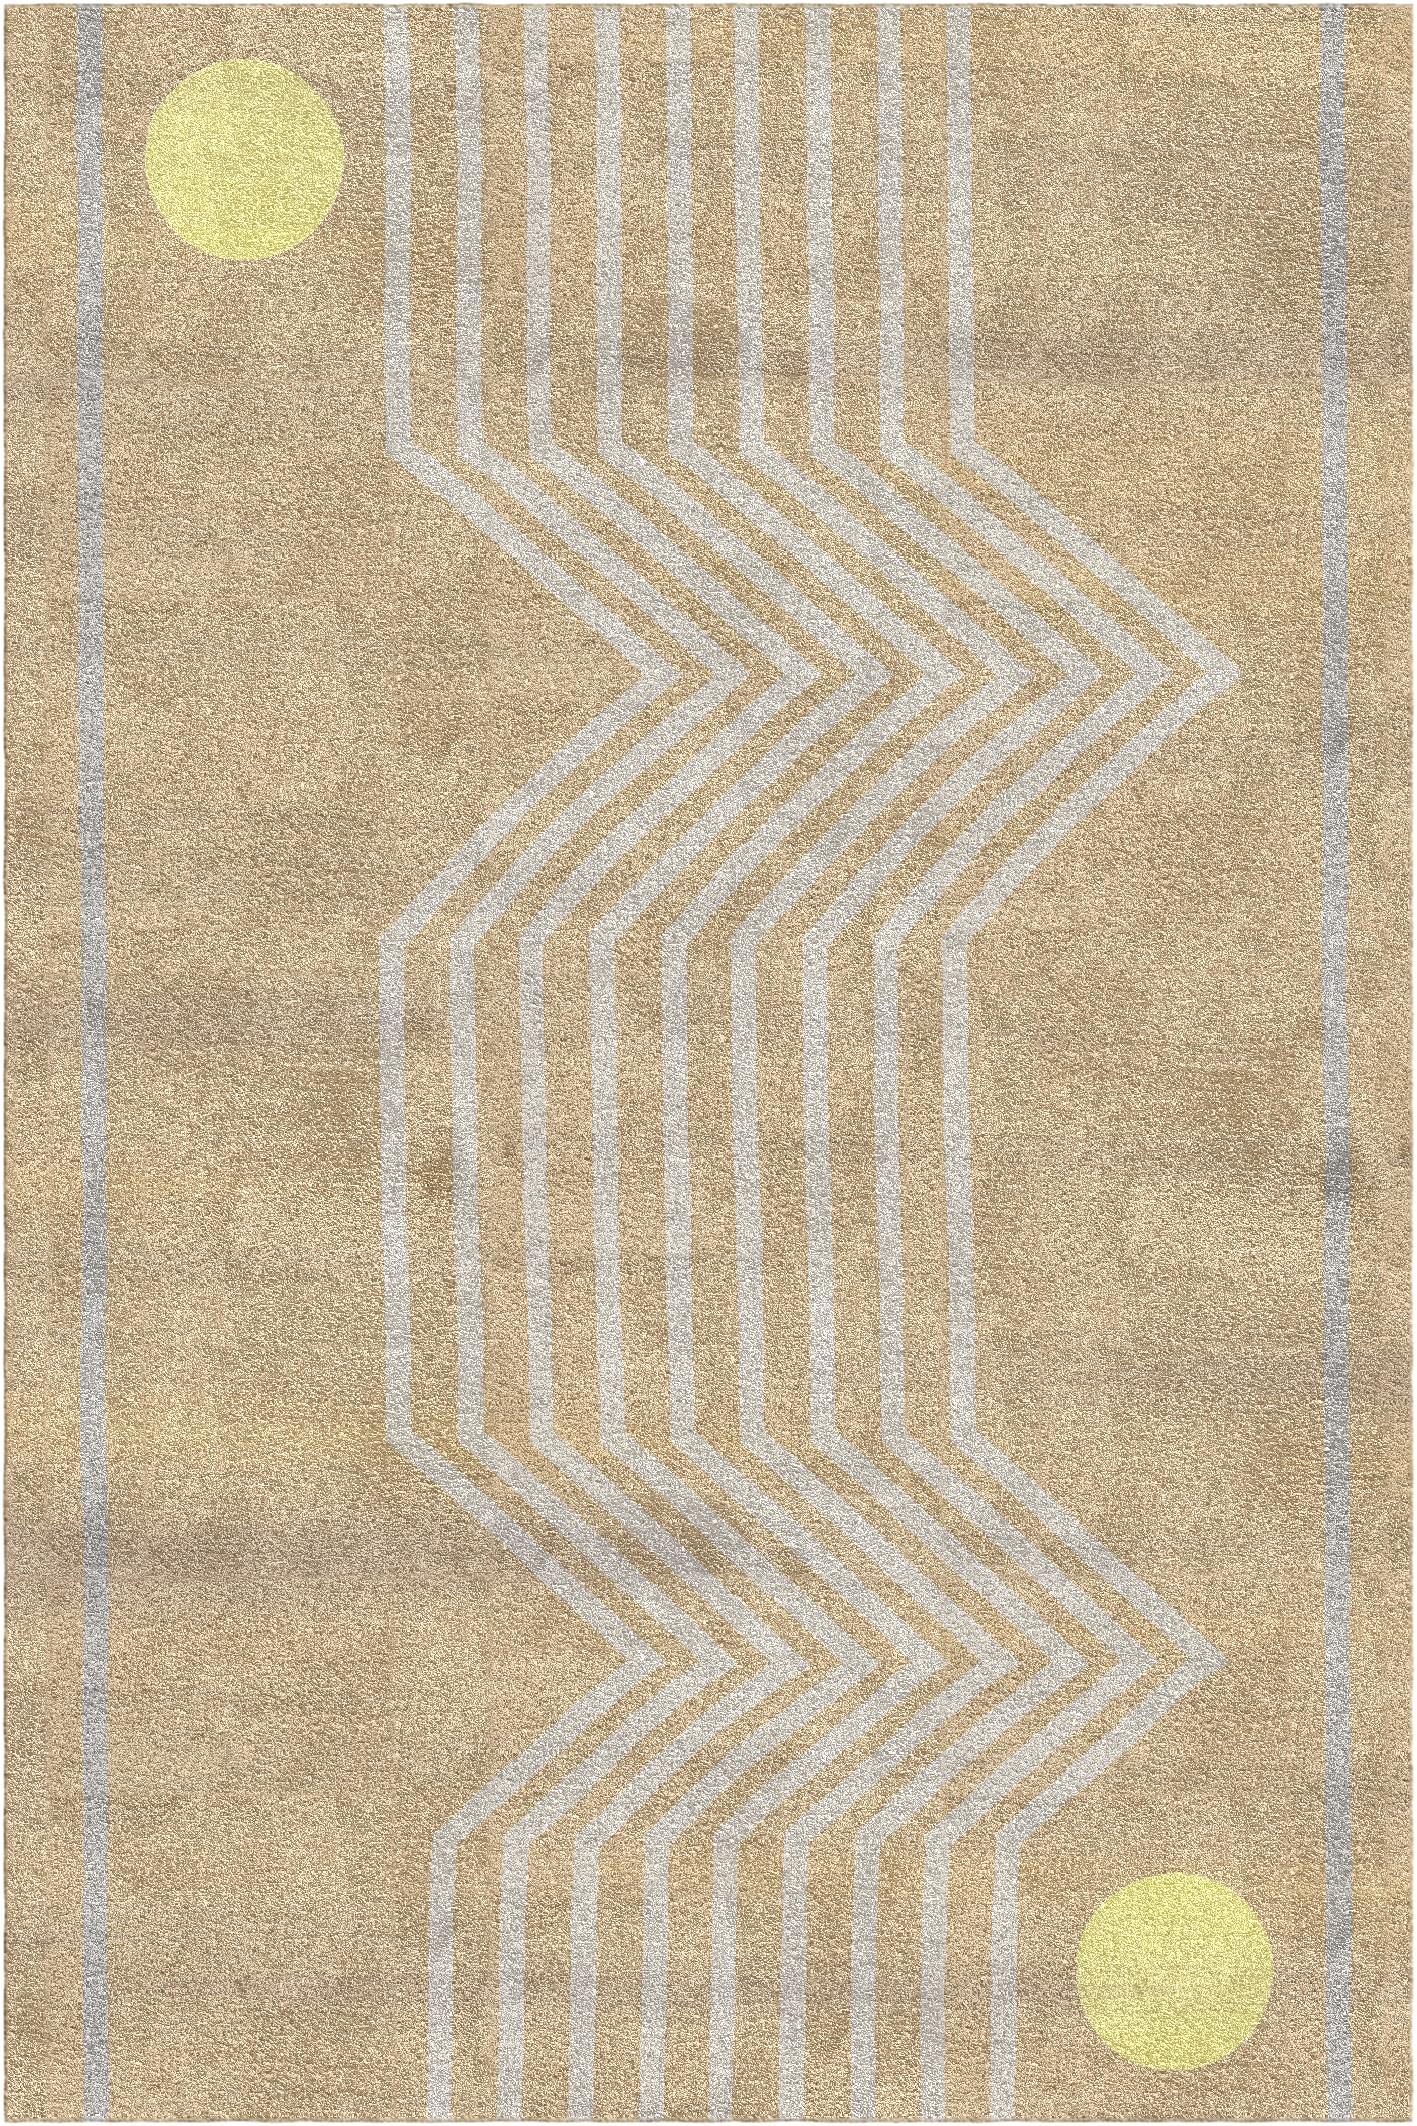 Hand-Crafted Futuro Rug IV by Vanessa Ordoñez For Sale